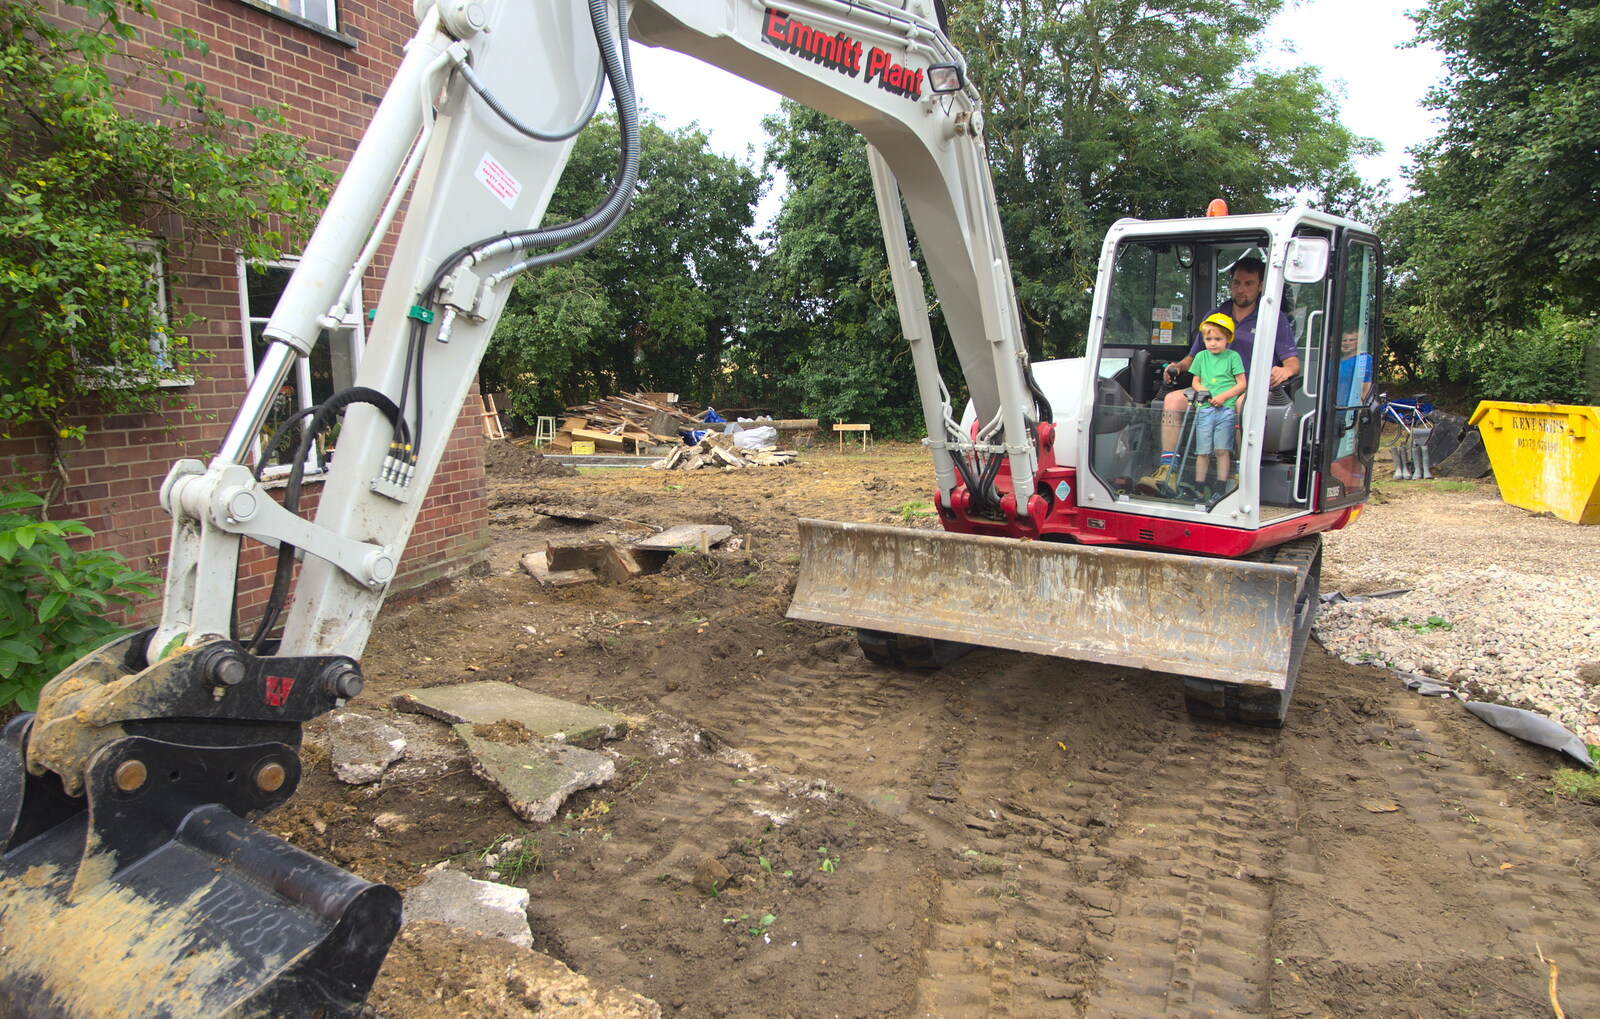 A view of the digger from Grand Designs: Building Commences, Brome, Suffolk - 8th August 2013